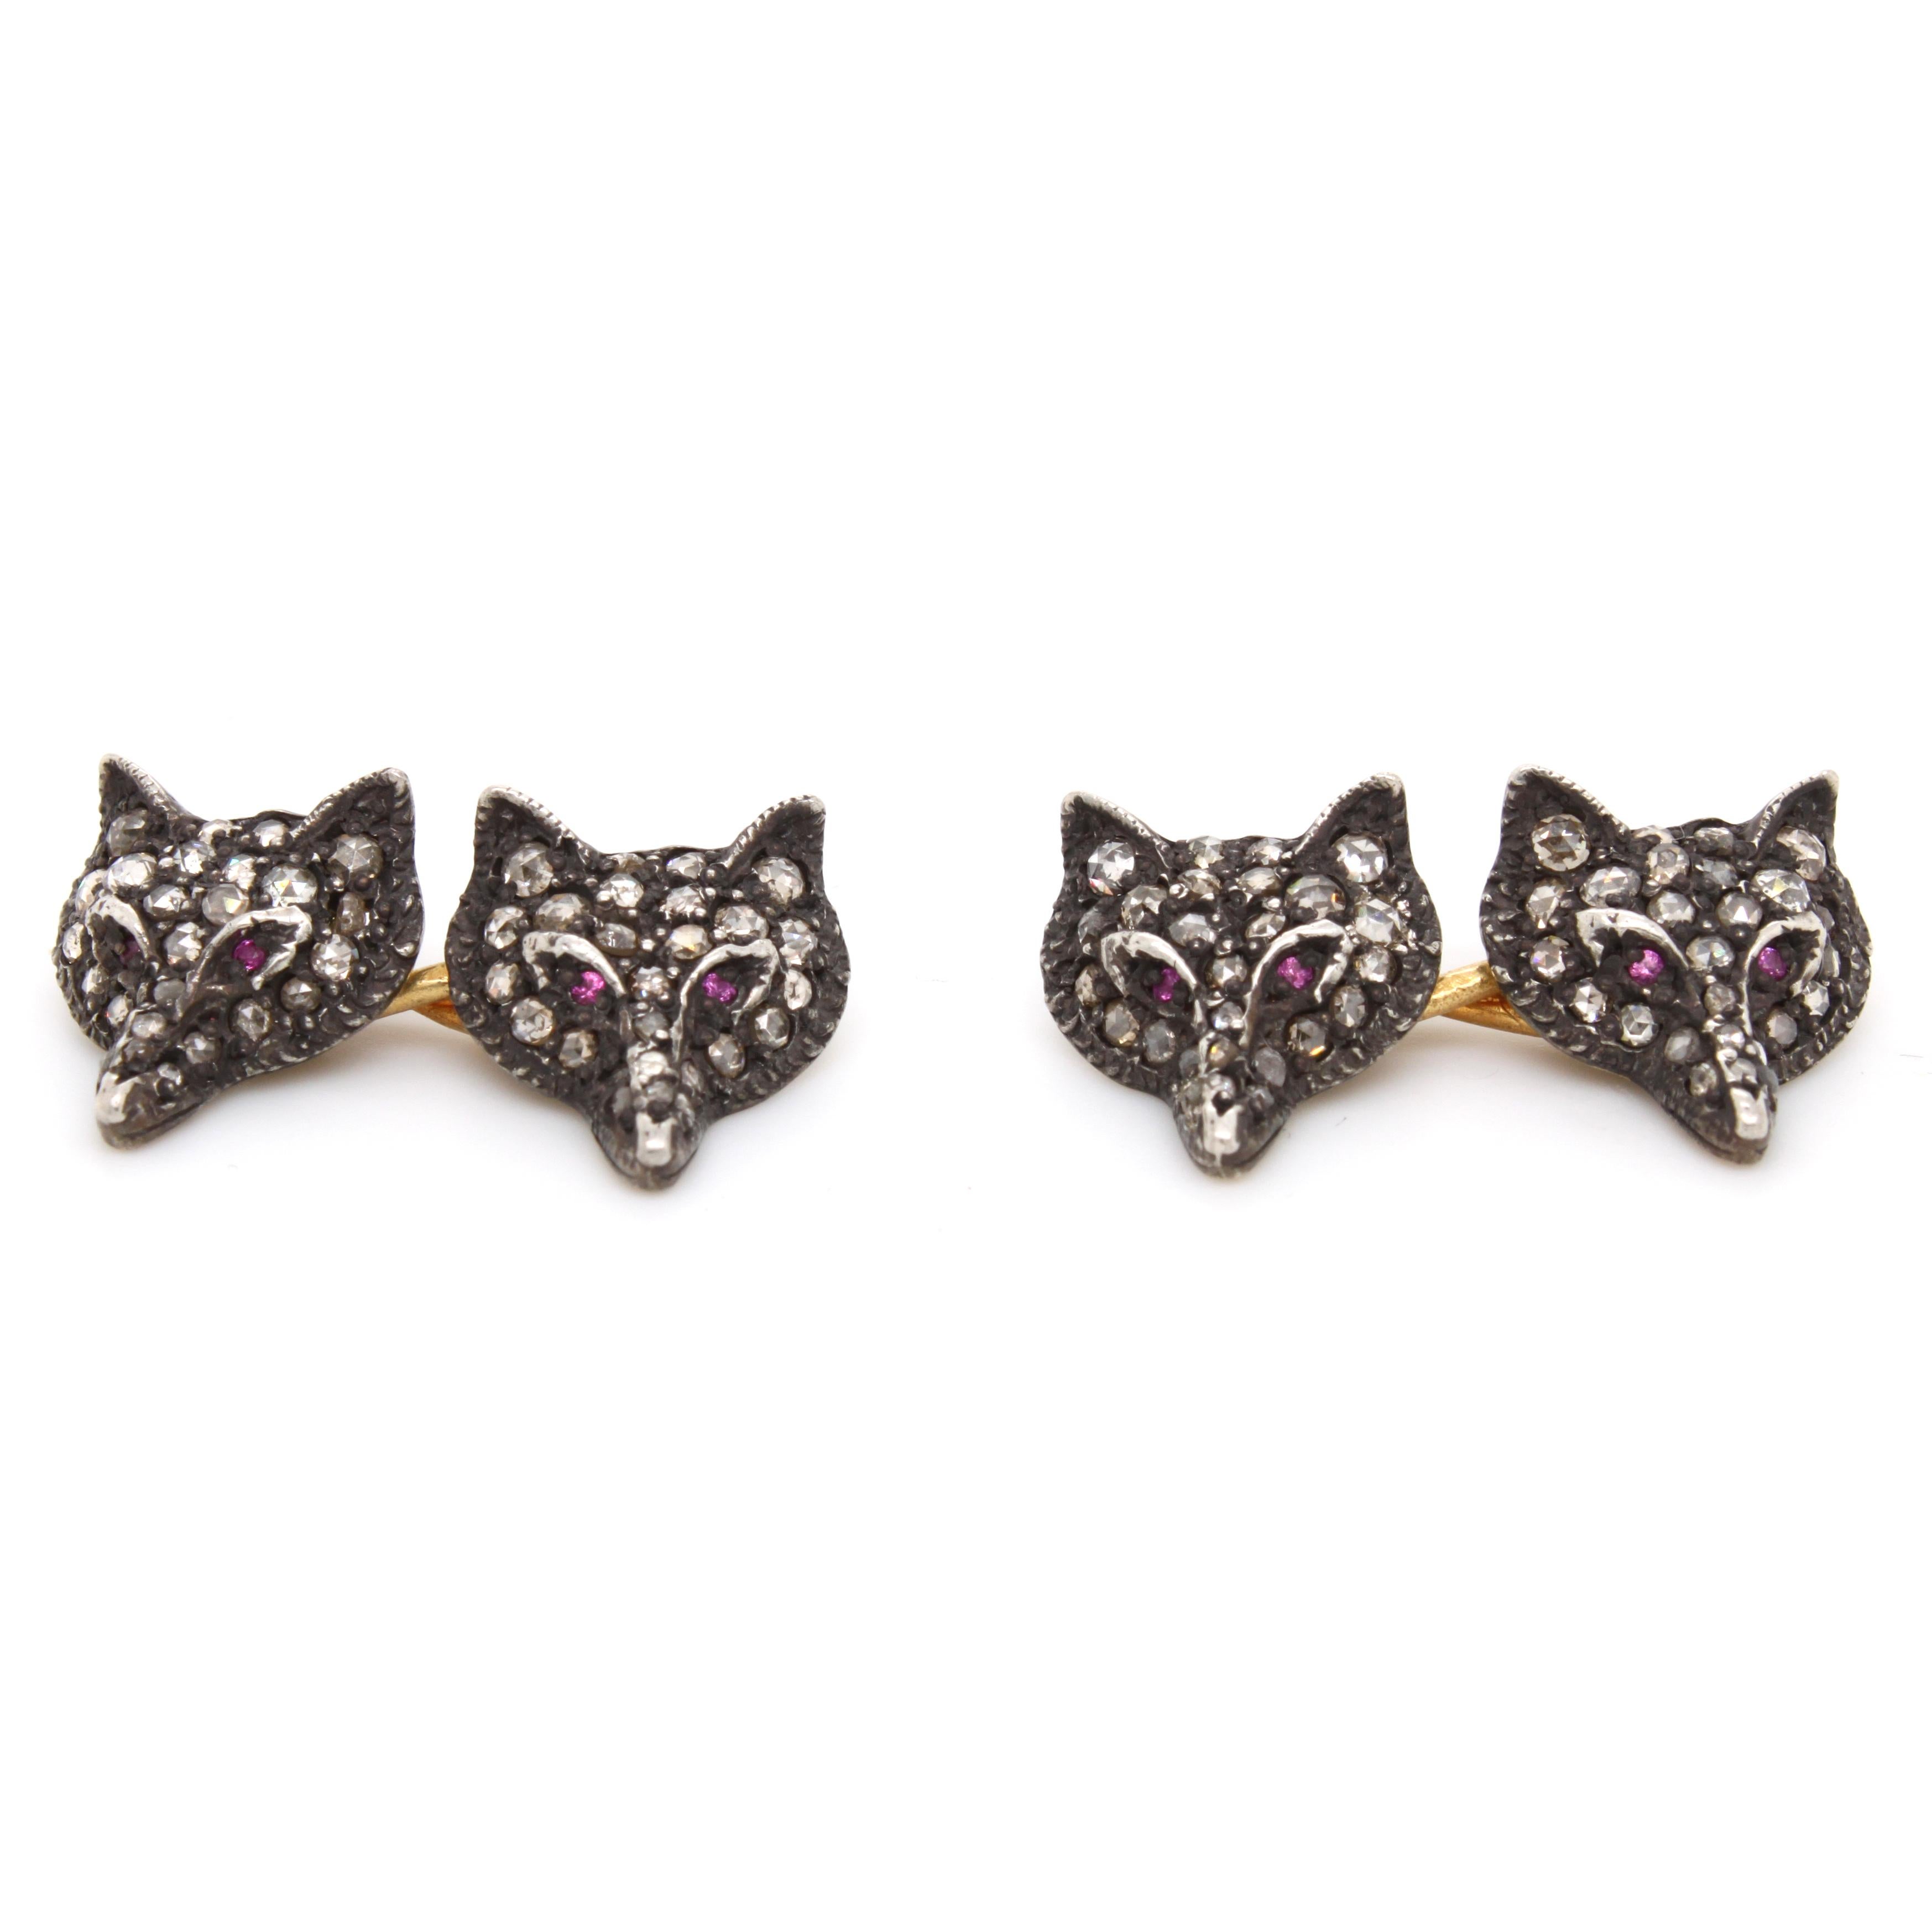 Victorian Fox Diamond and Ruby Cufflinks, ca. 1880s

A pair of cufflinks from the 1880s, featuring four foxes, made with bright rose-cut diamonds and ruby eyes.

Made in silver and gold with very good patina.
